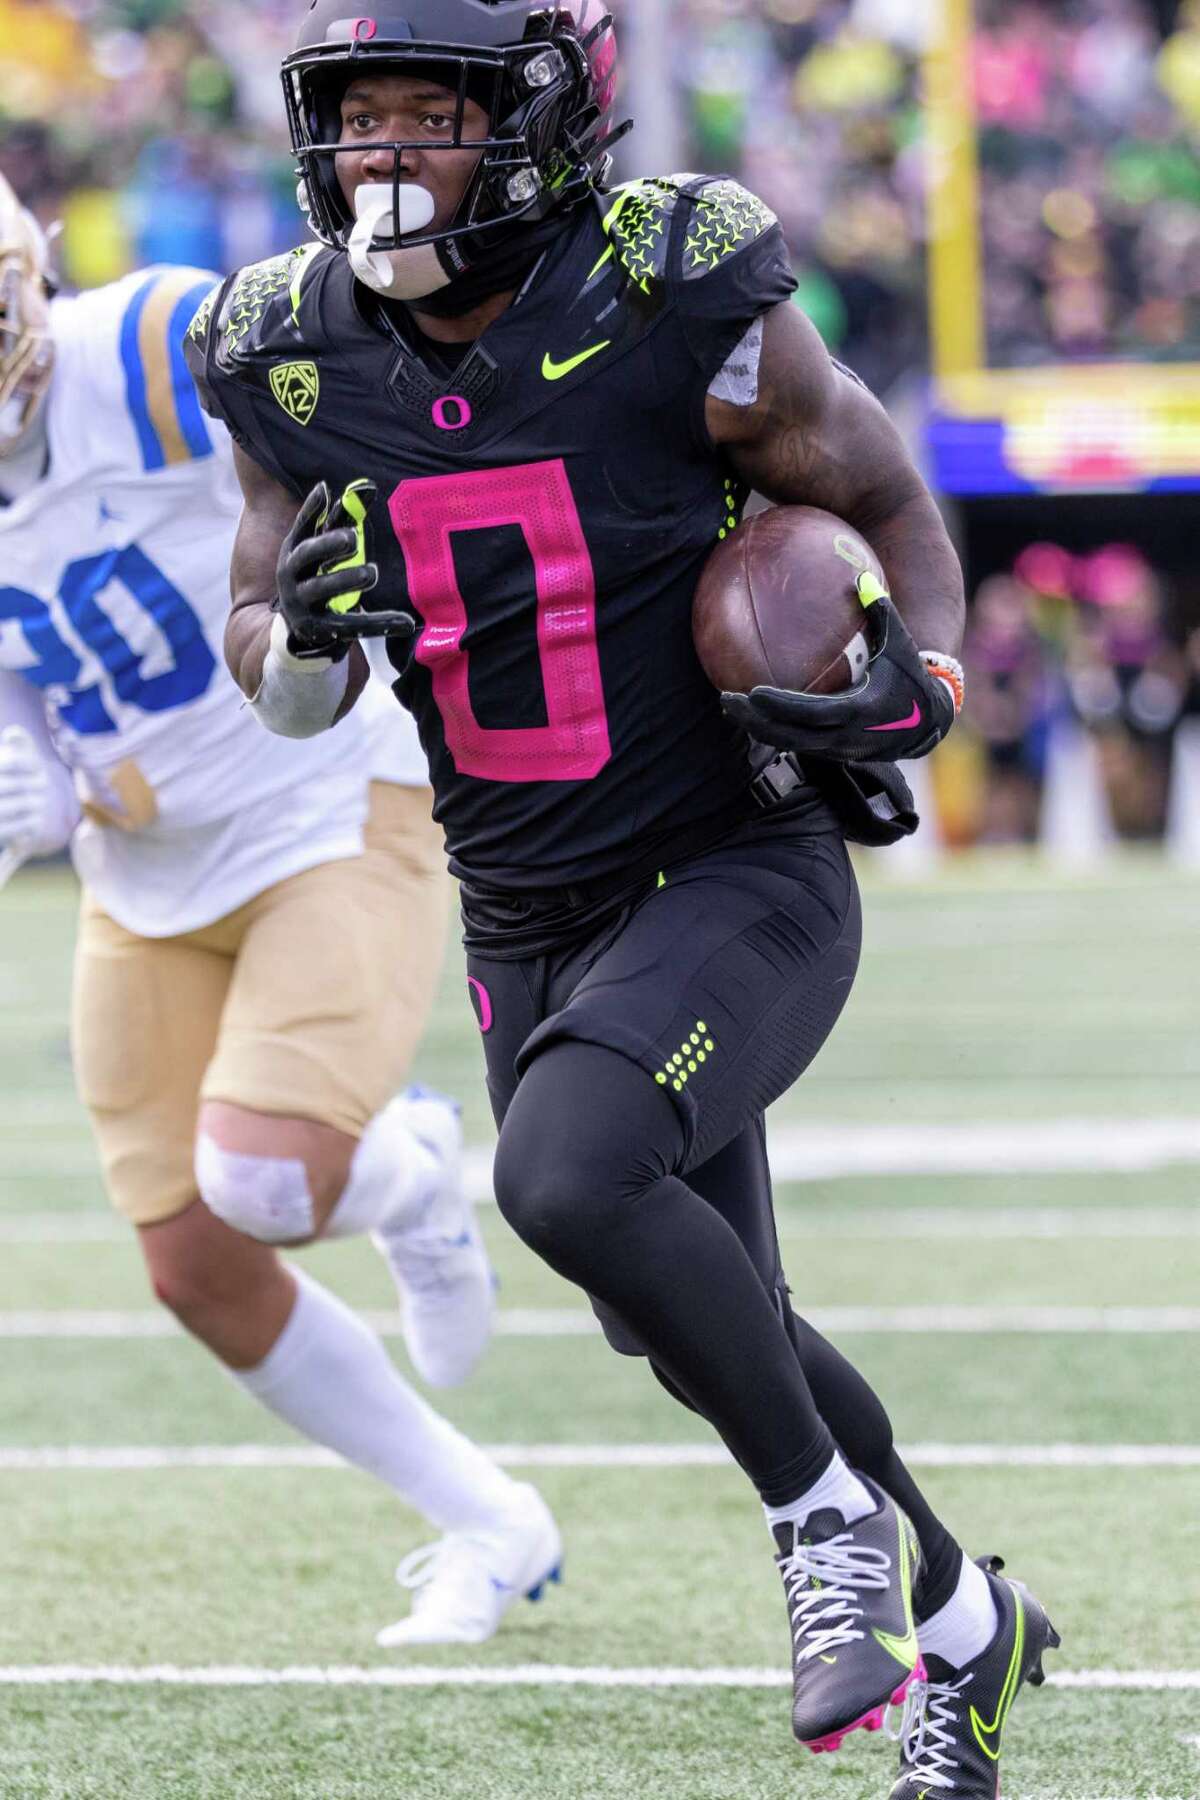 EUGENE, OR - OCTOBER 22: Running back Bucky Irving #0 of the Oregon Ducks runs for touchdown against the UCLA Bruins during the second half at Autzen Stadium on October 22, 2022 in Eugene, Oregon. (Photo by Tom Hauck/Getty Images)